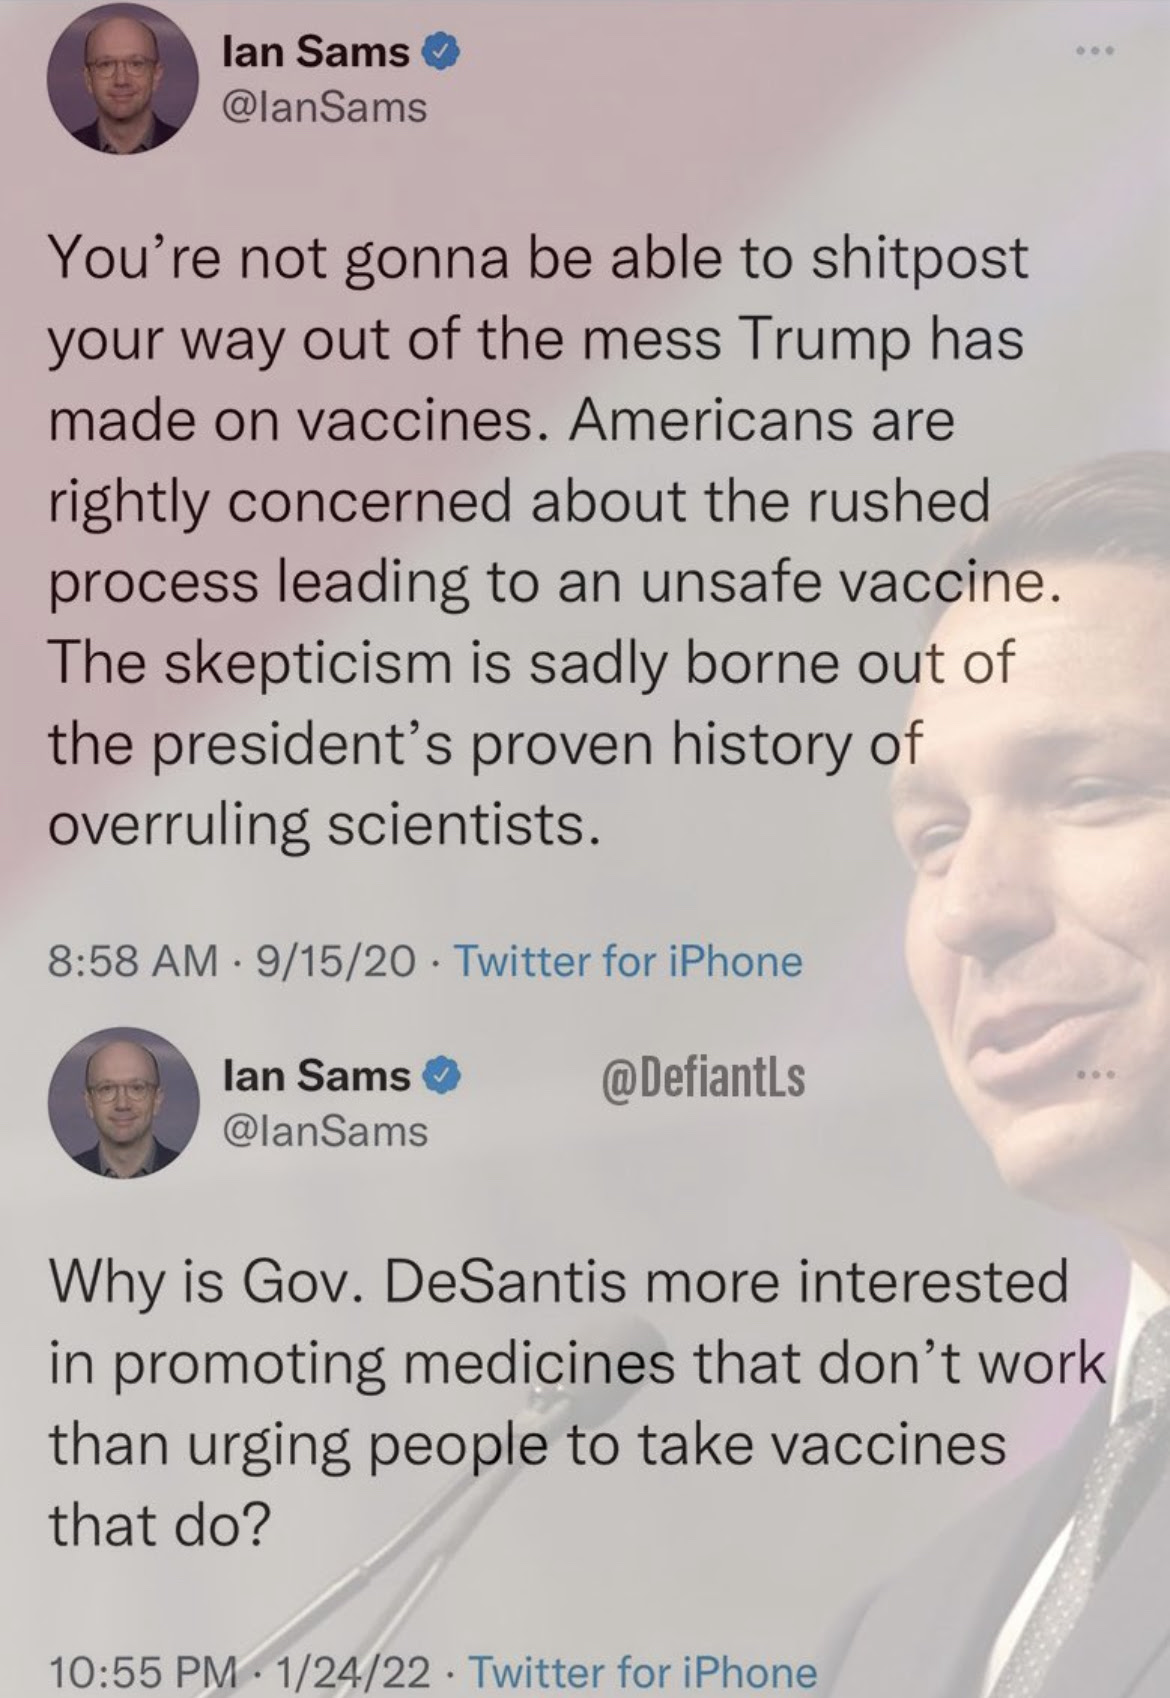 Hypocrite: Ian Sams. COndemnd vaccines while Trump is in office then praises them when he is gone.